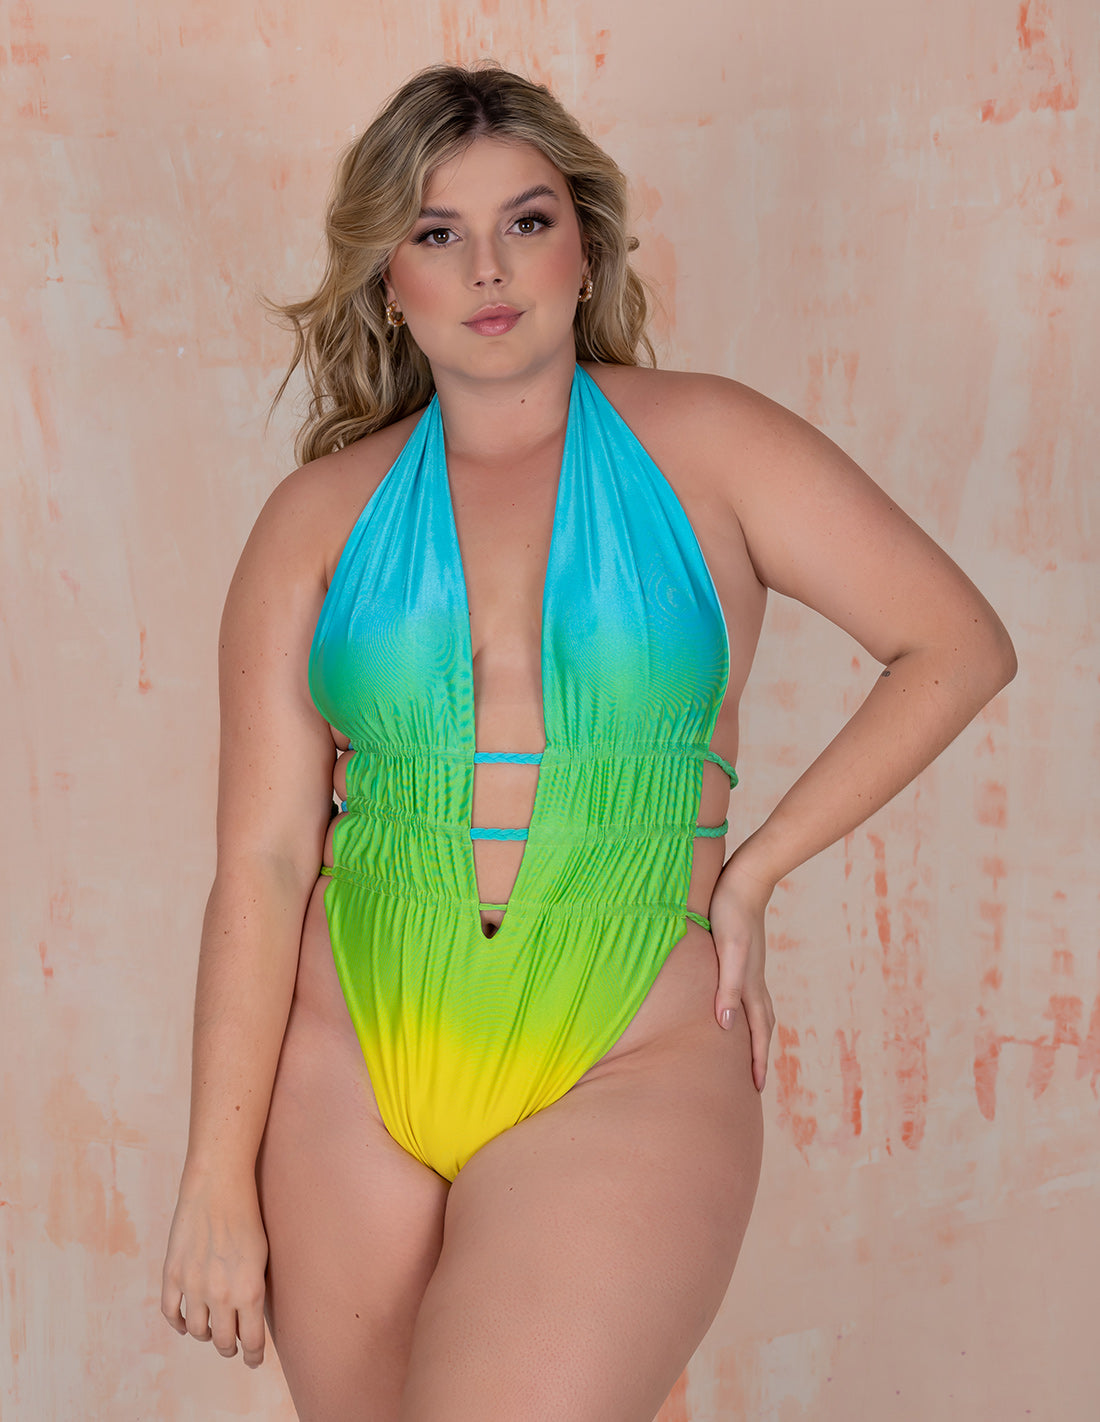 Lotus One-Piece Sky Blue + Green + Yellow. Hand-Dyed One-Piece Swimsuit With Hand Woven Macramé In Sky Blue + Green + Yellow. Entreaguas